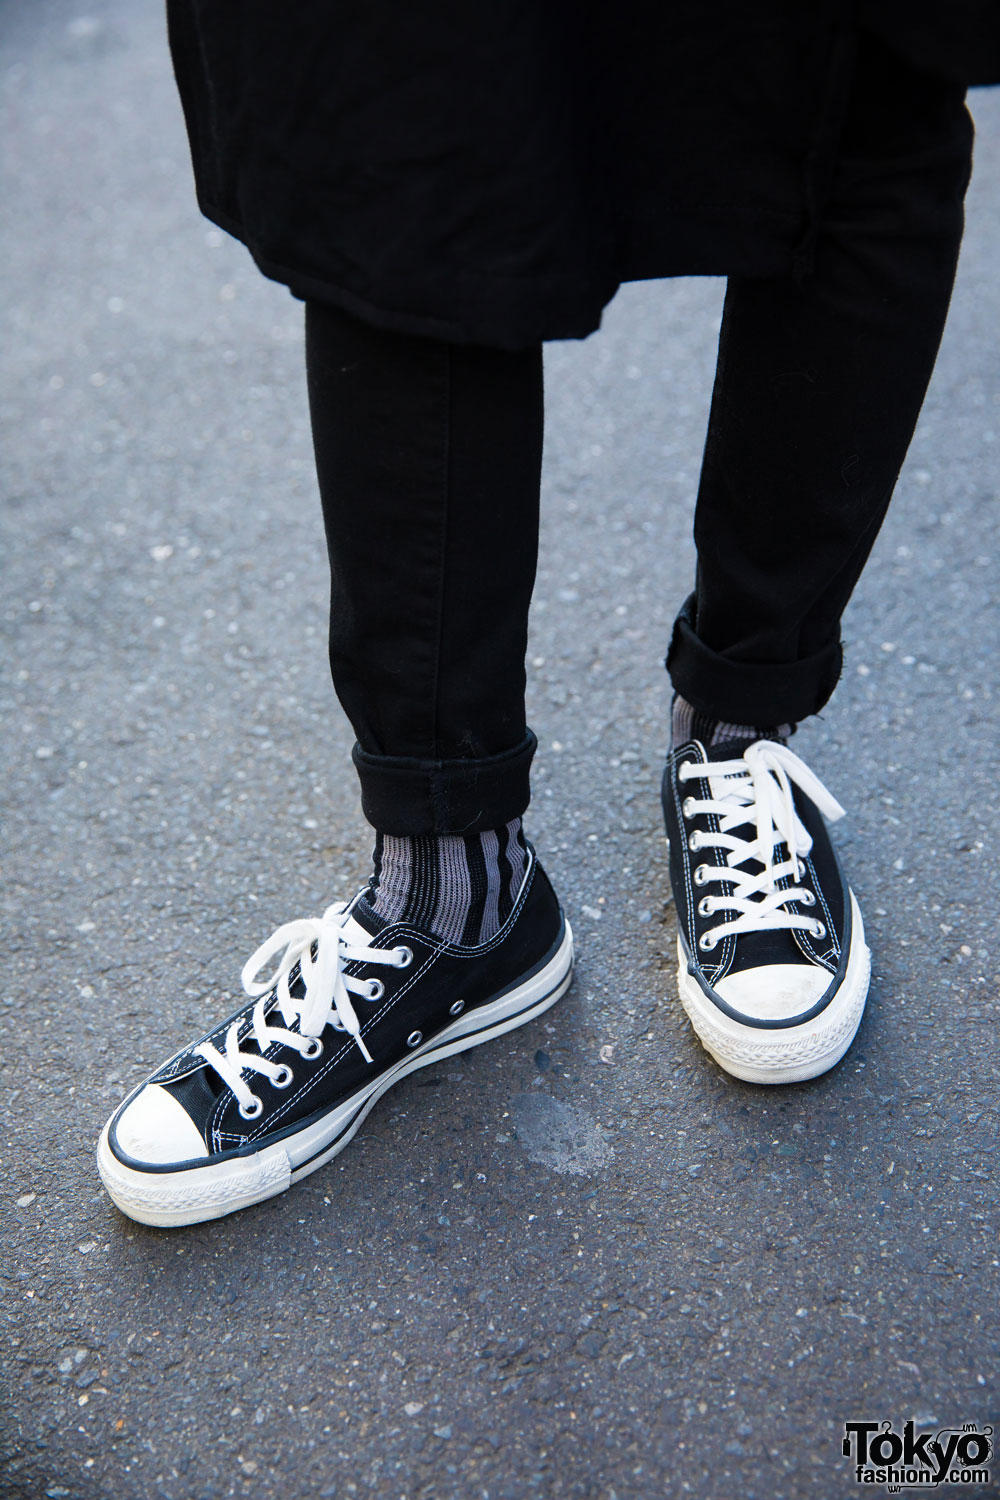 Harajuku Guy Clad in All Black w/ Comme des Garcons, Converse & Chrome ...